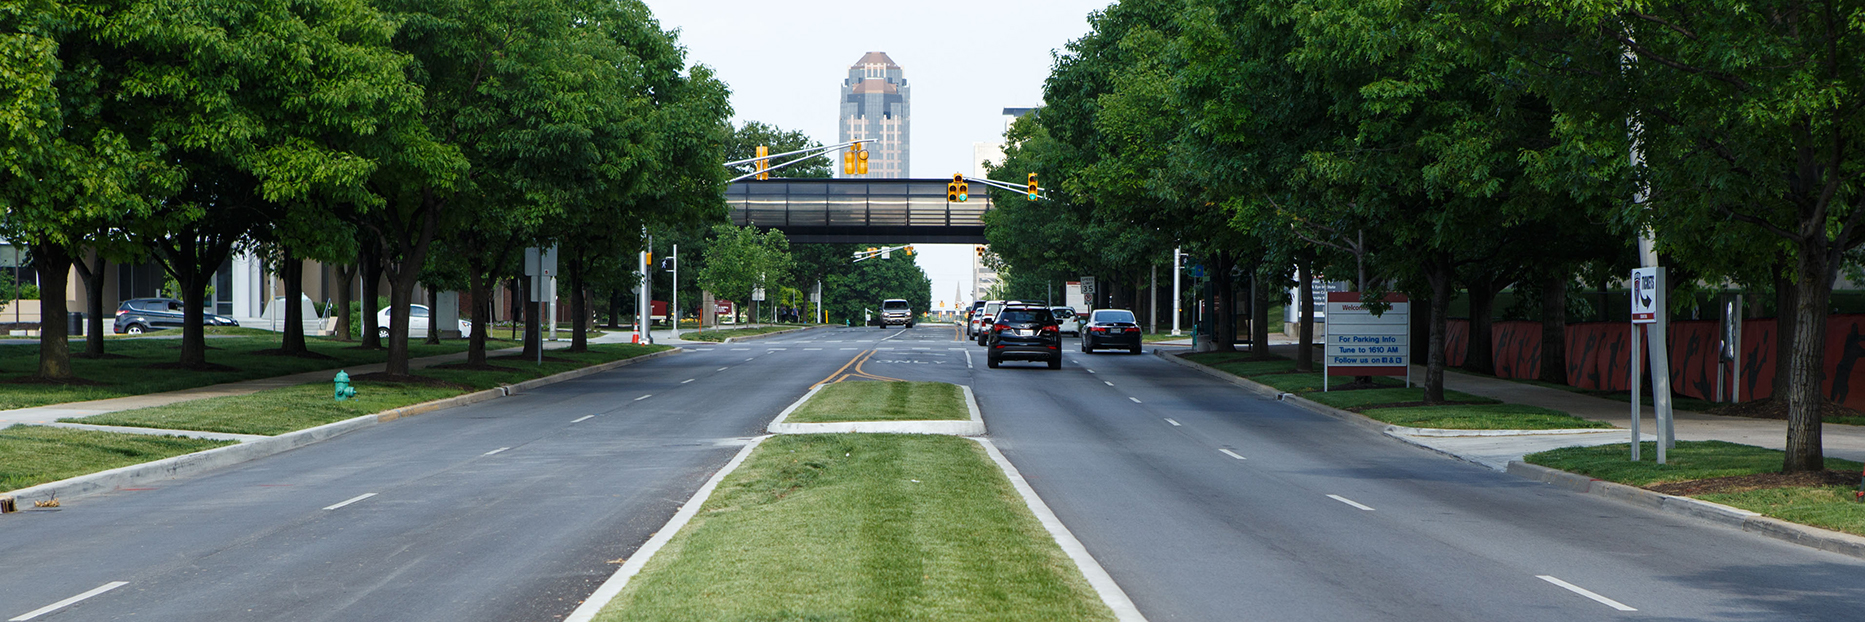 Newly constructed New York St. with grassy median and bike trail